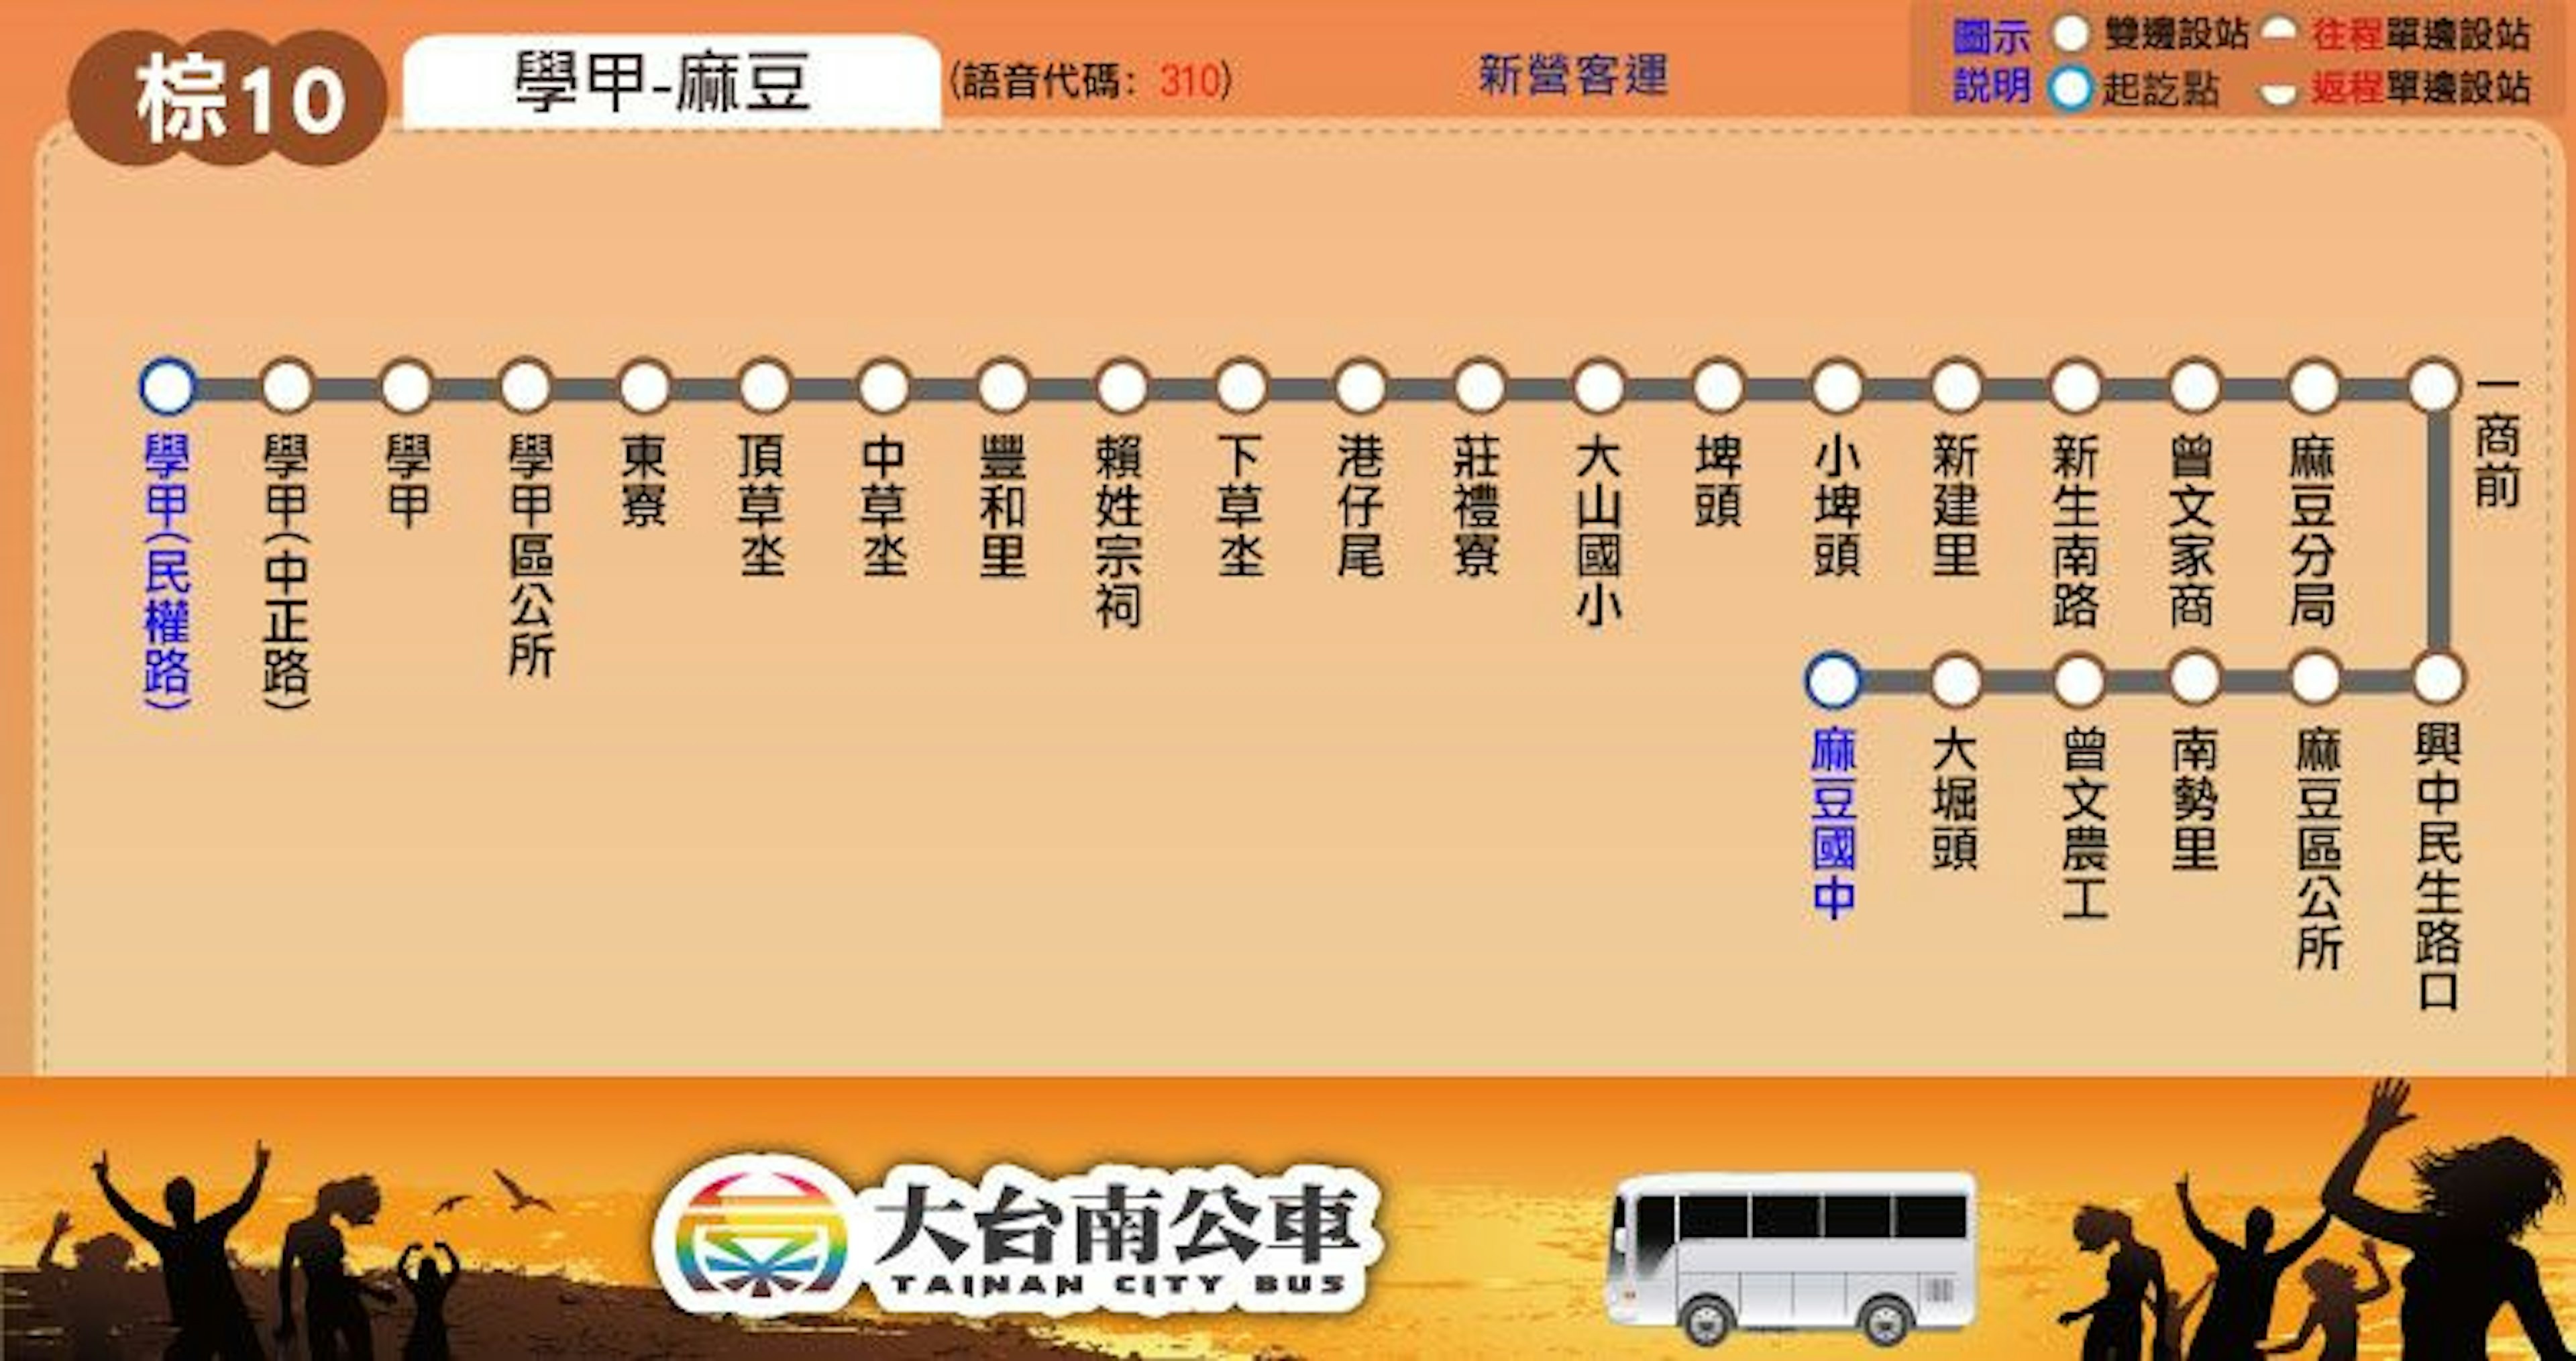 BR10Route Map-台南 Bus